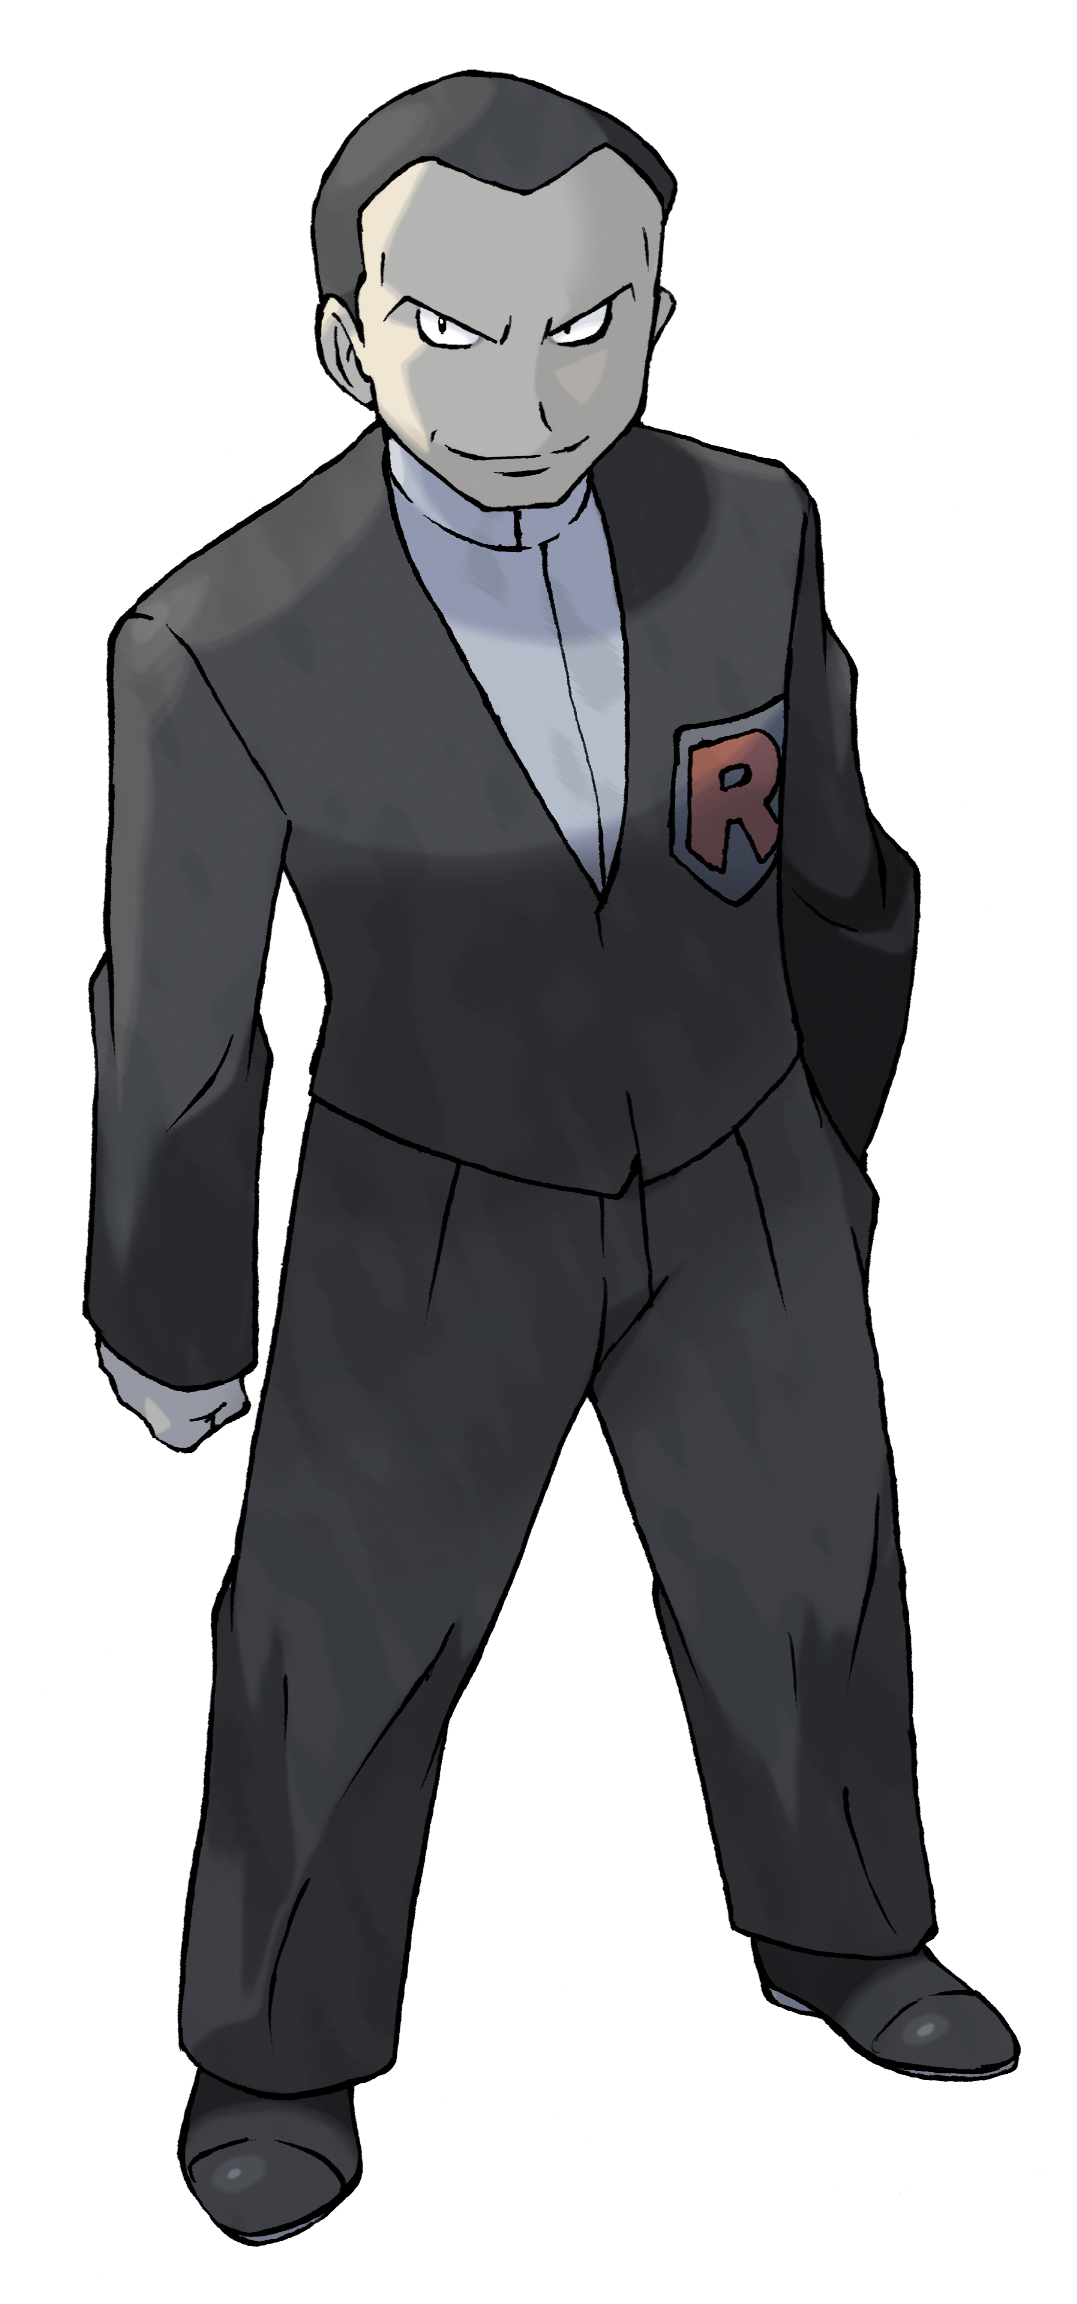 http://archives.bulbagarden.net/media/upload/0/0b/FireRed_LeafGreen_Giovanni.png